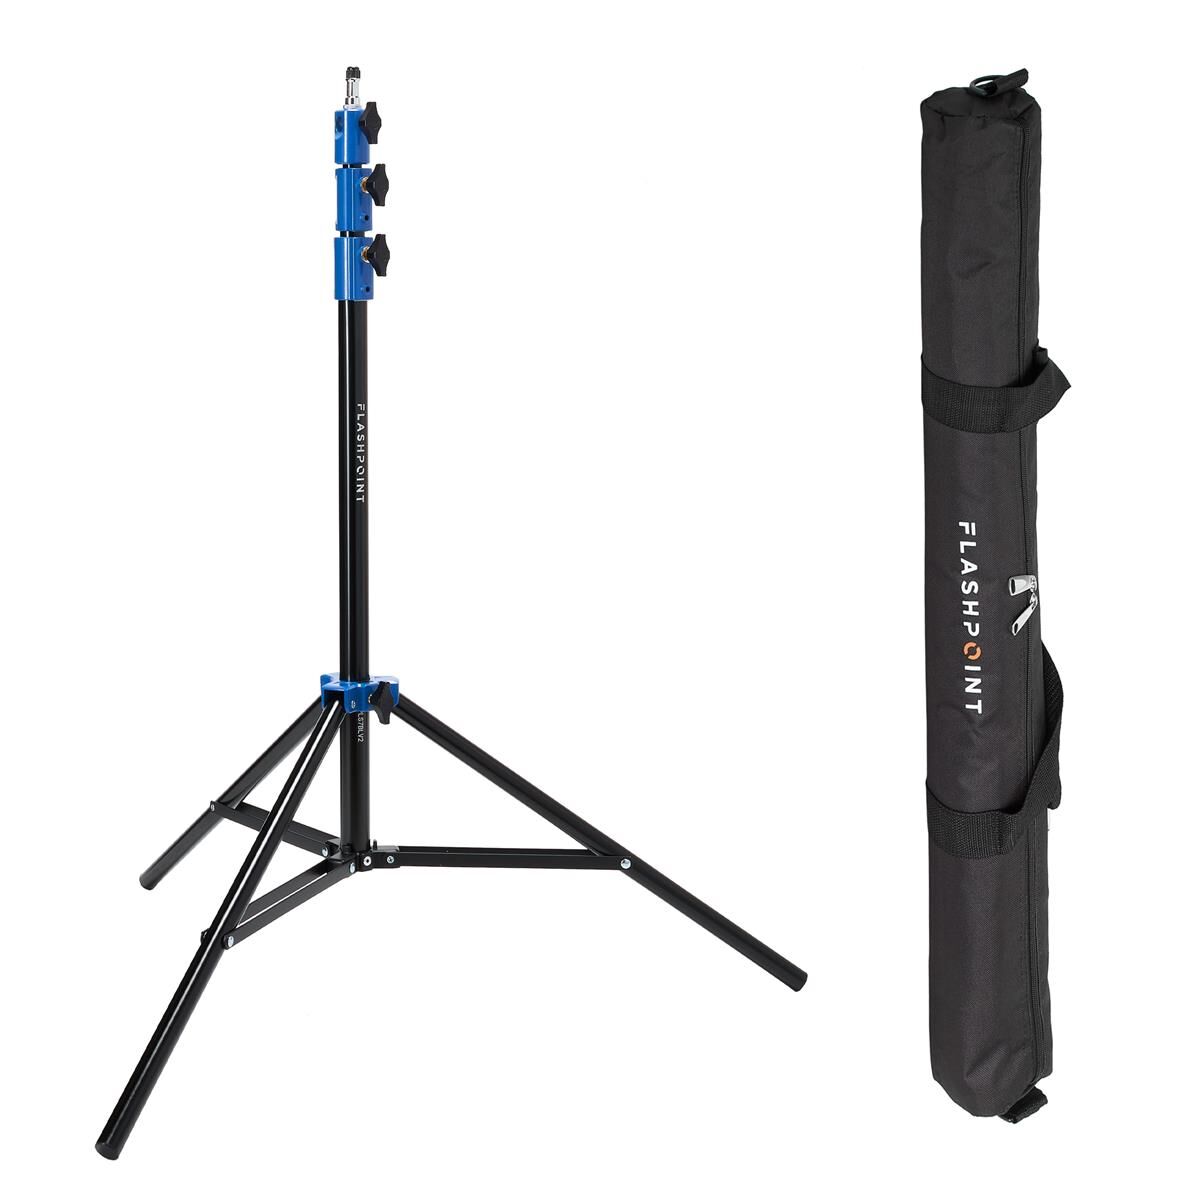 Flashpoint Pro Air-Cushioned Heavy-Duty Light Stand (Blue, 7.2')